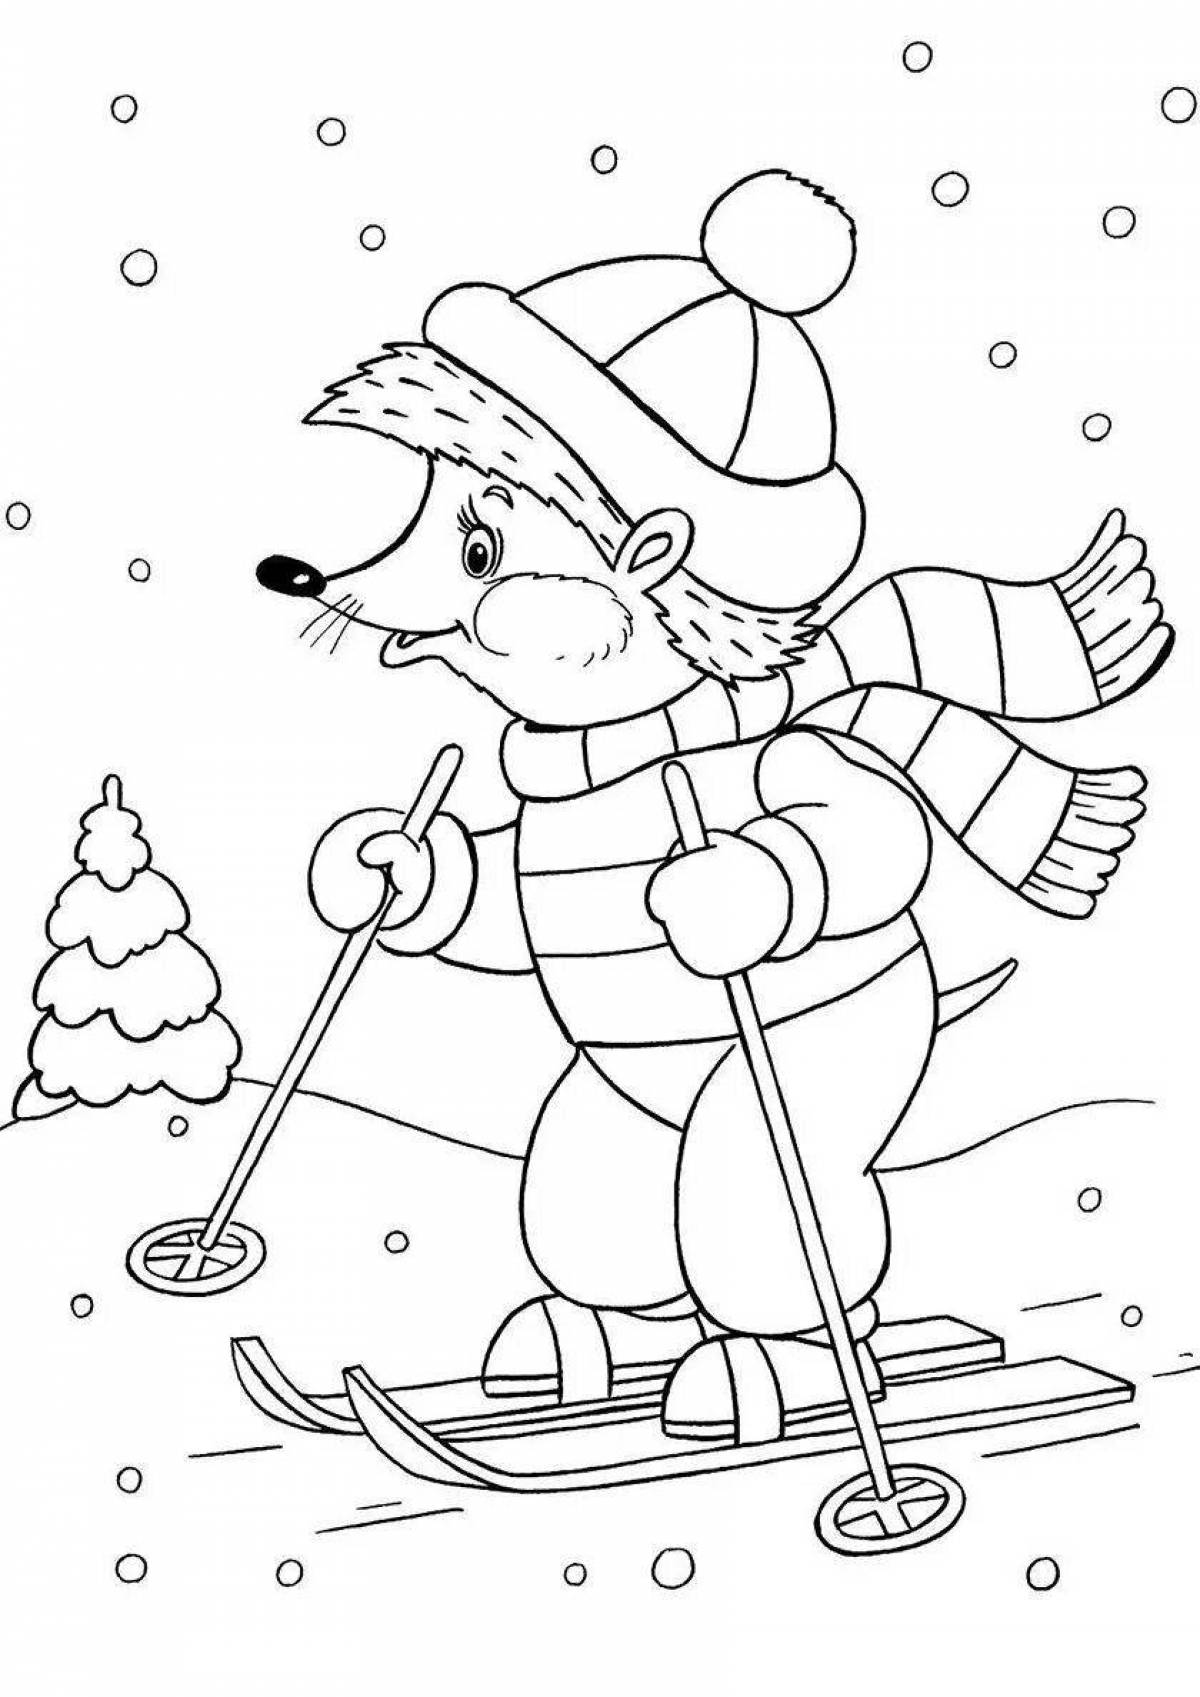 A fun winter coloring book for kids 6-7 years old